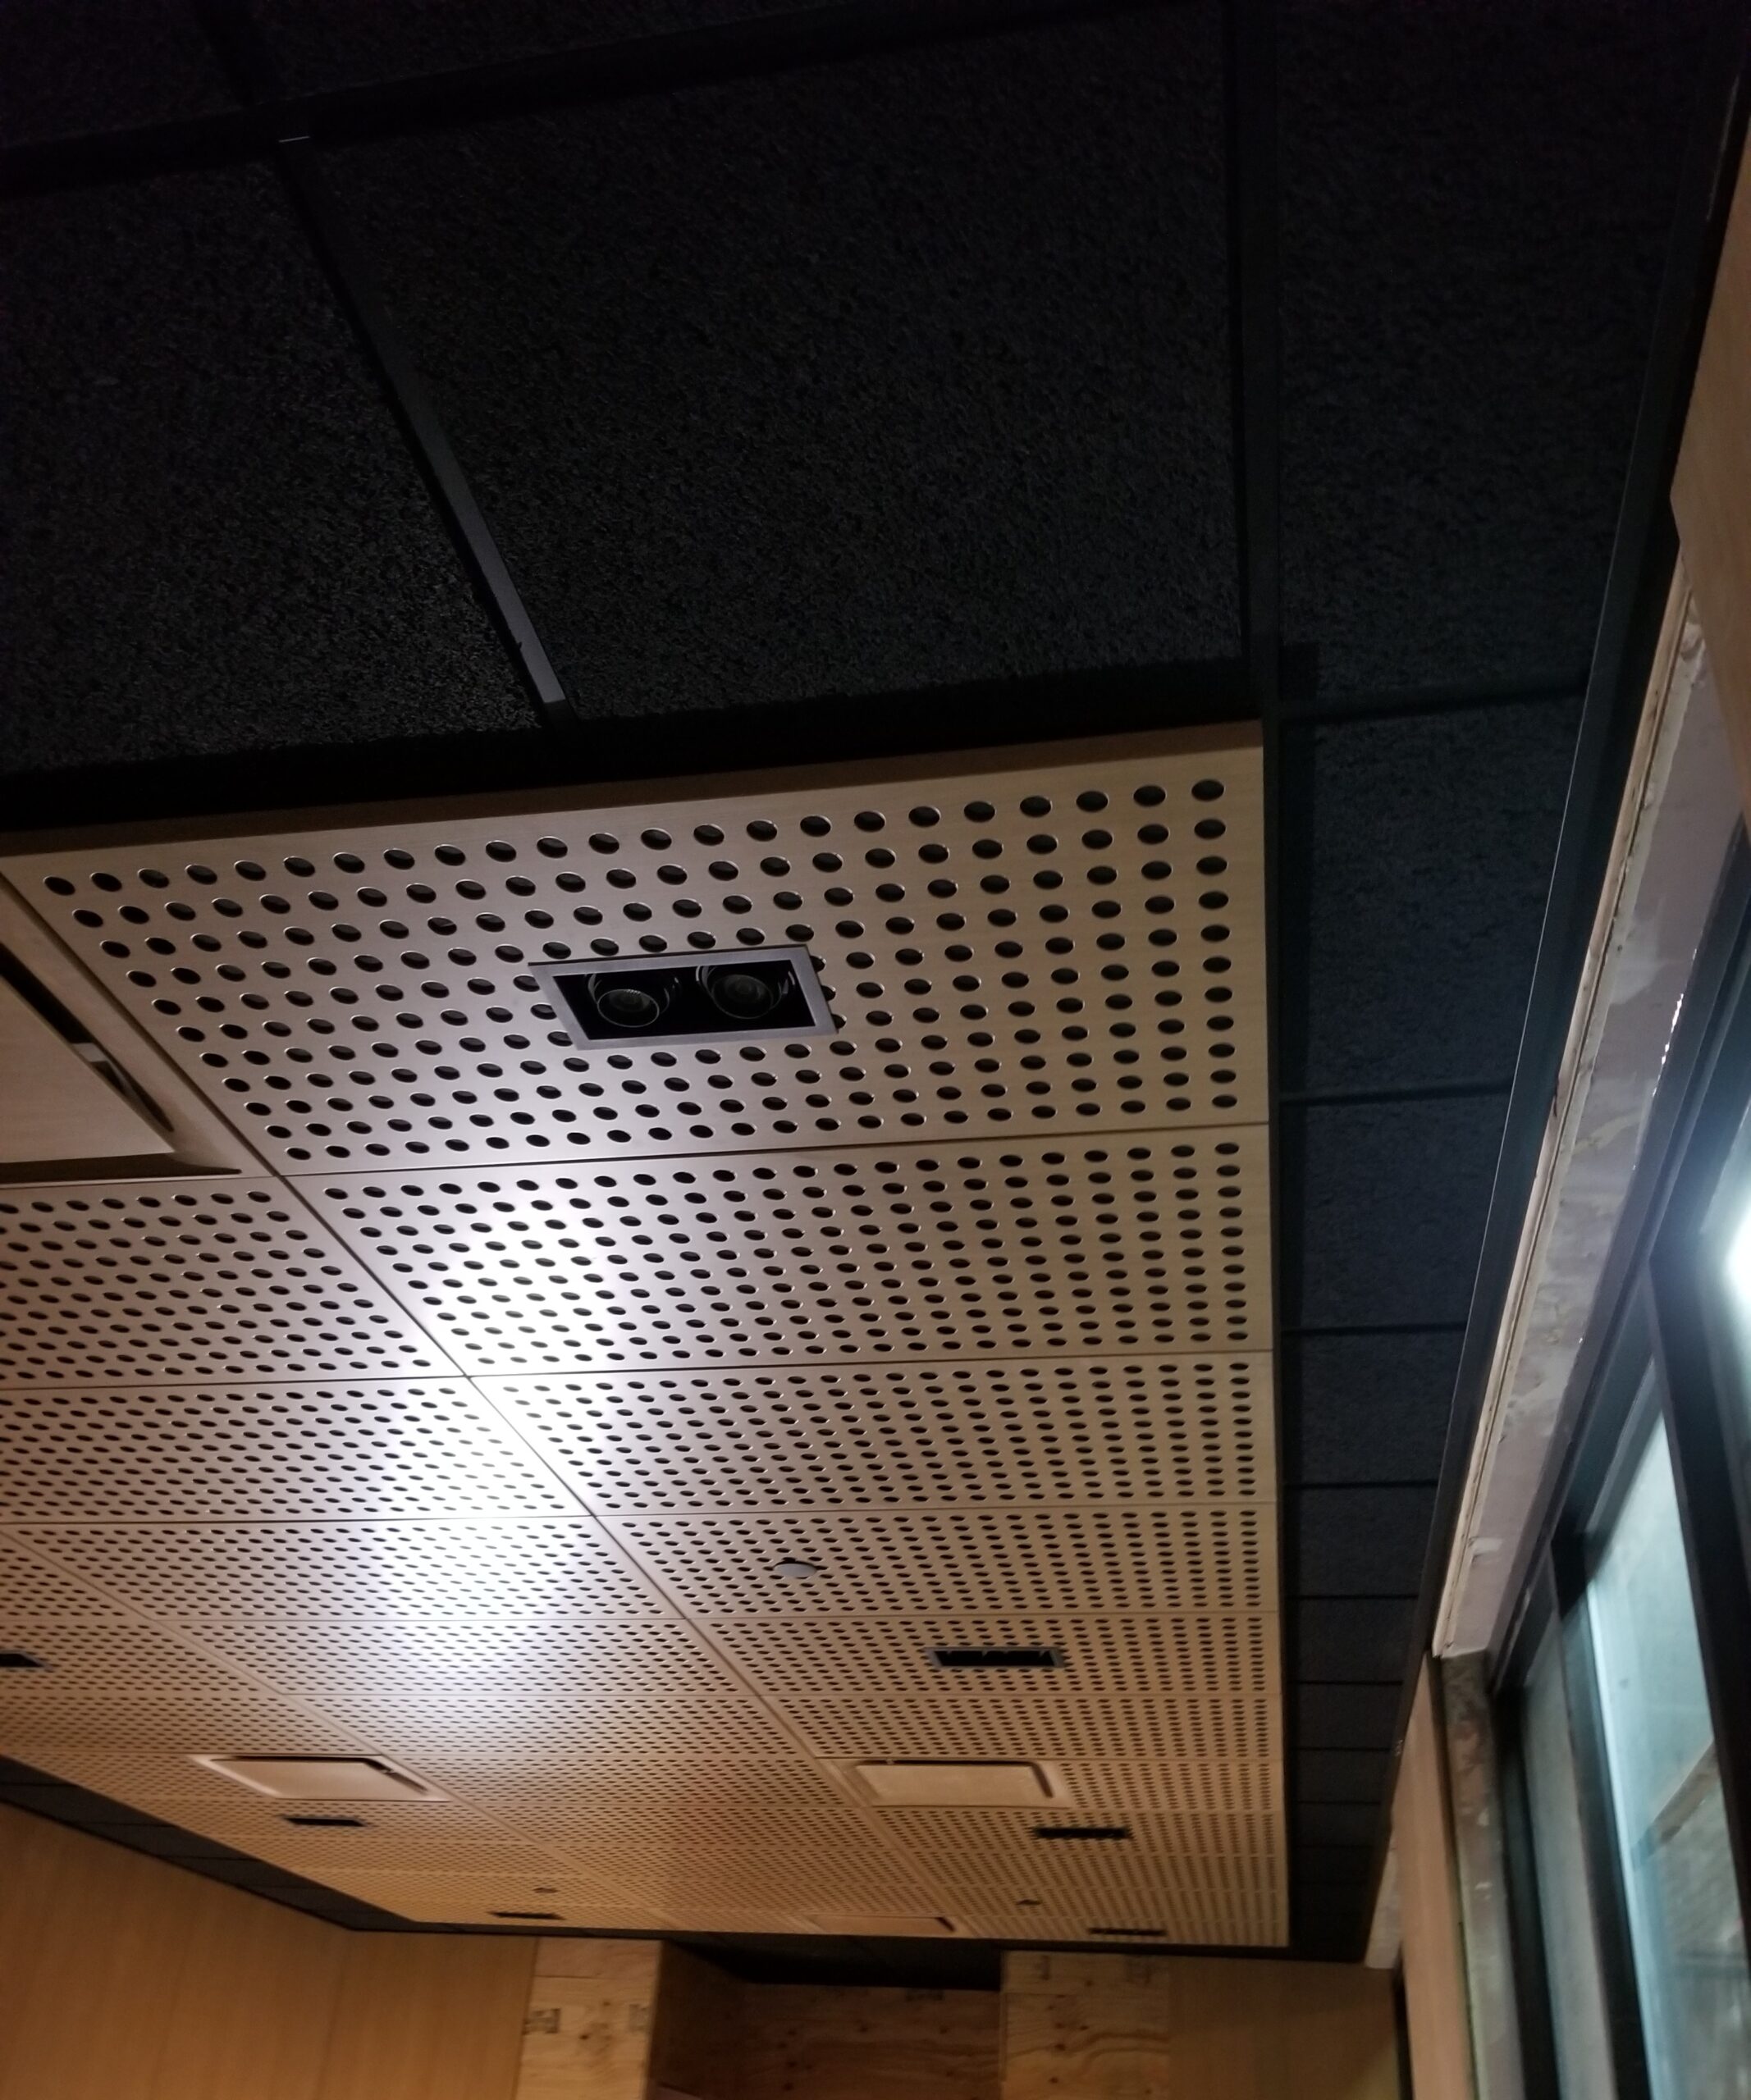 A ceiling with holes in it and a window